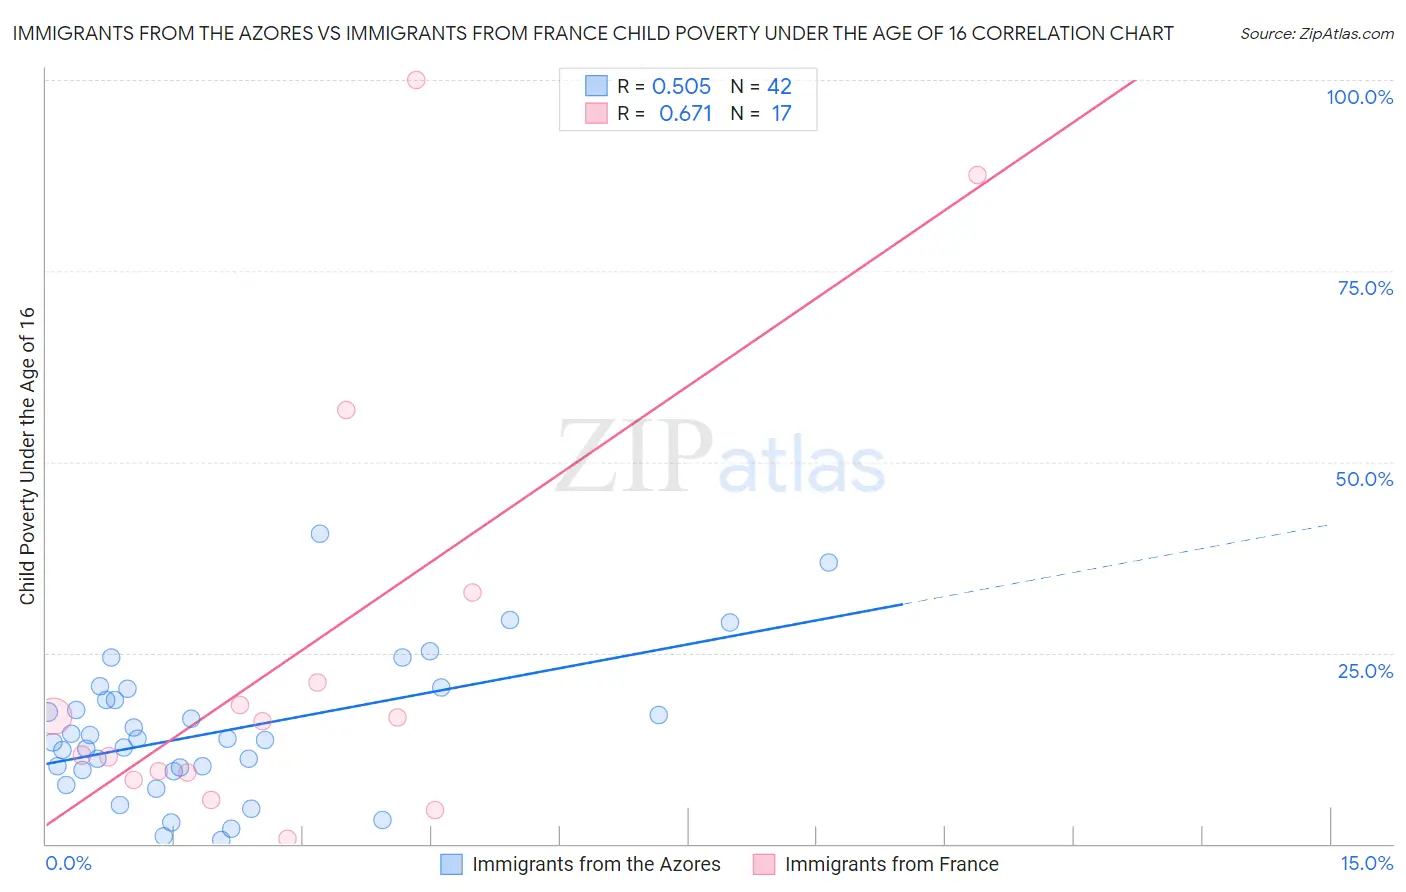 Immigrants from the Azores vs Immigrants from France Child Poverty Under the Age of 16